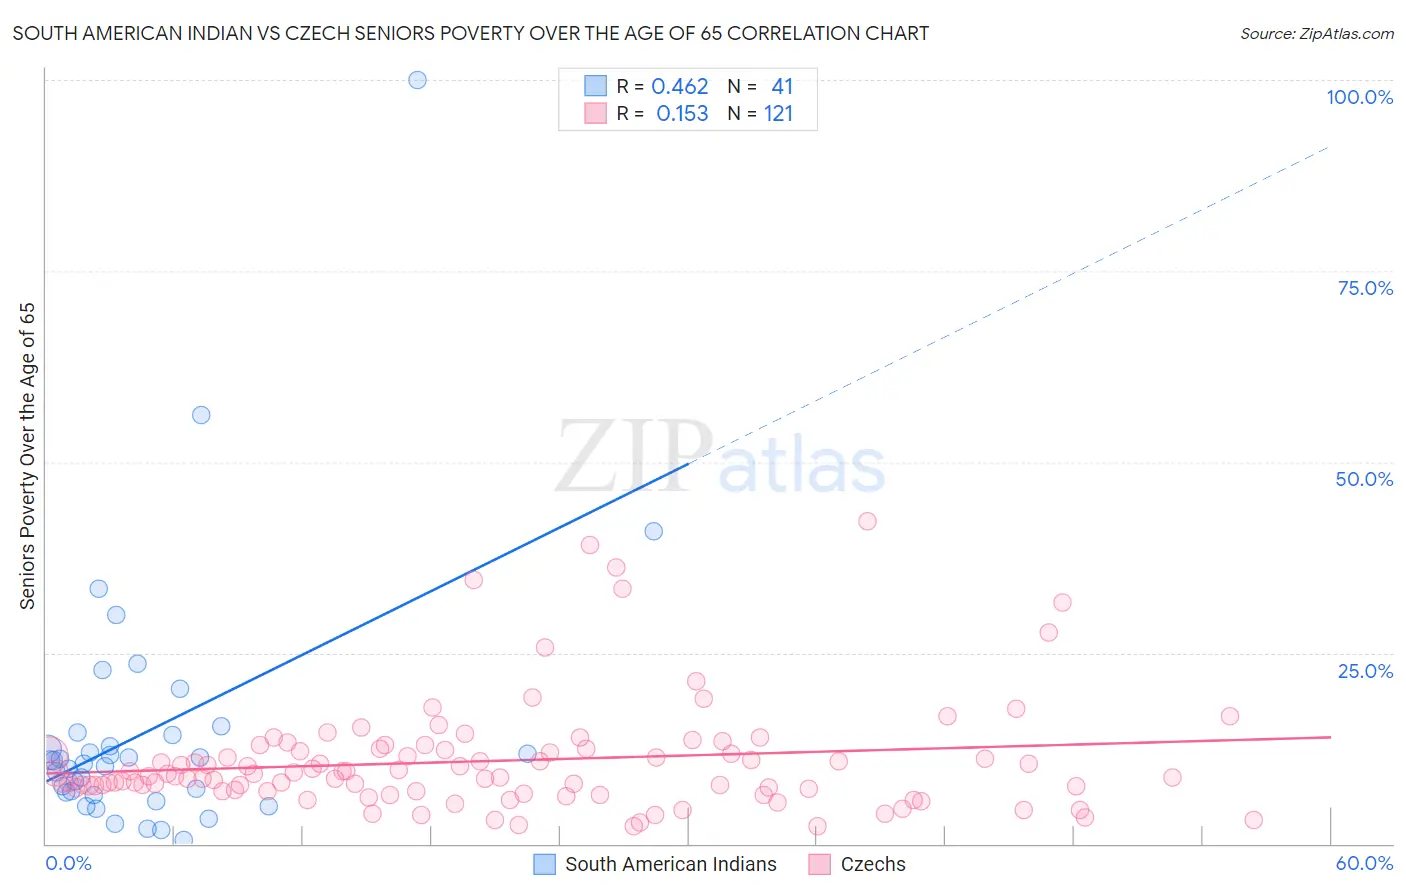 South American Indian vs Czech Seniors Poverty Over the Age of 65